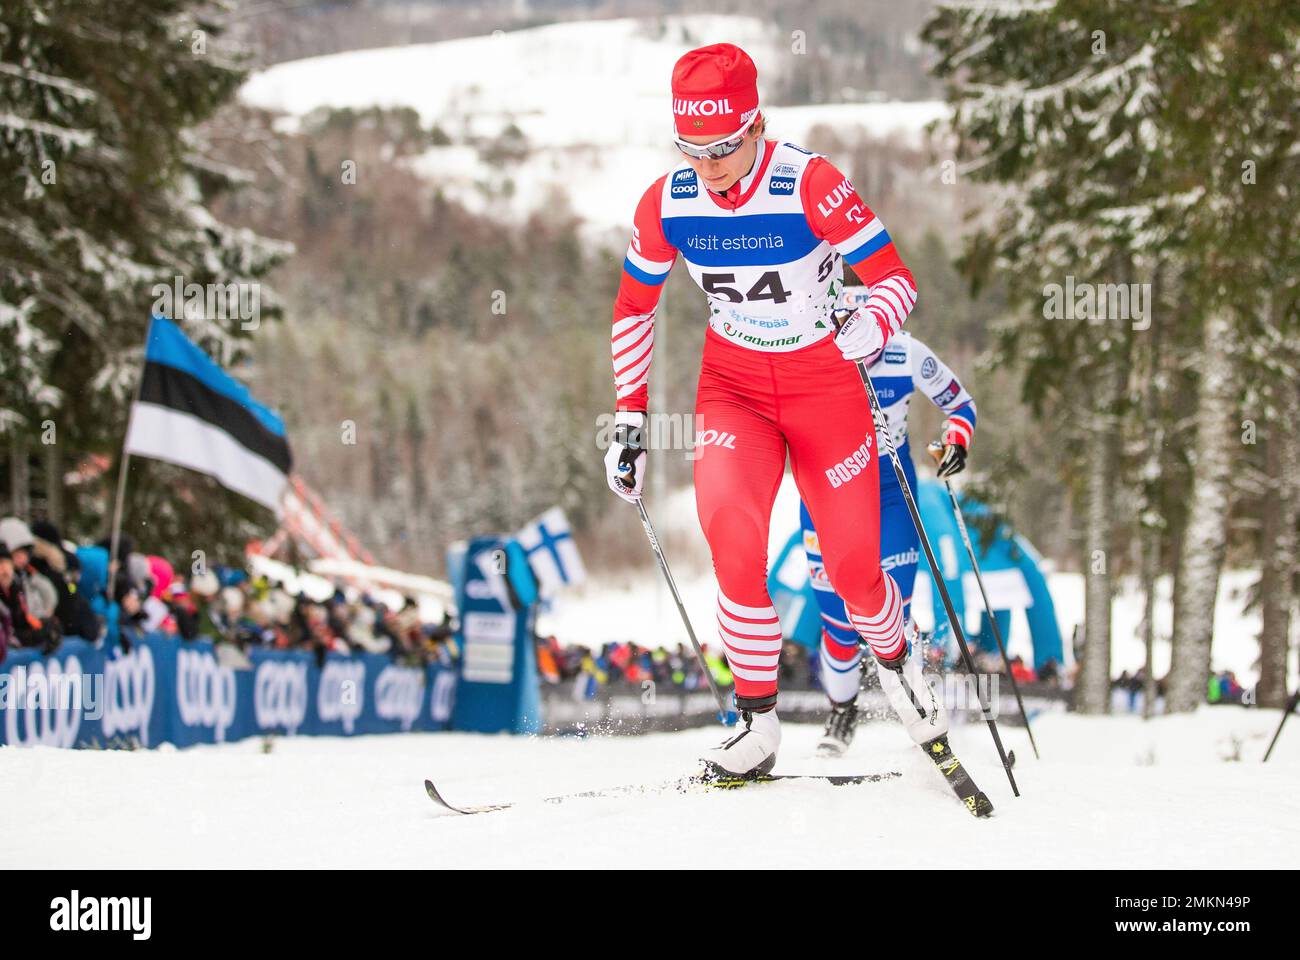 Third placed Natalia Nepryaeva of Russia competes during the Ladies 10 km of the FIS Cross Country World Cup in Otepaa, Estonia, Sunday, Jan